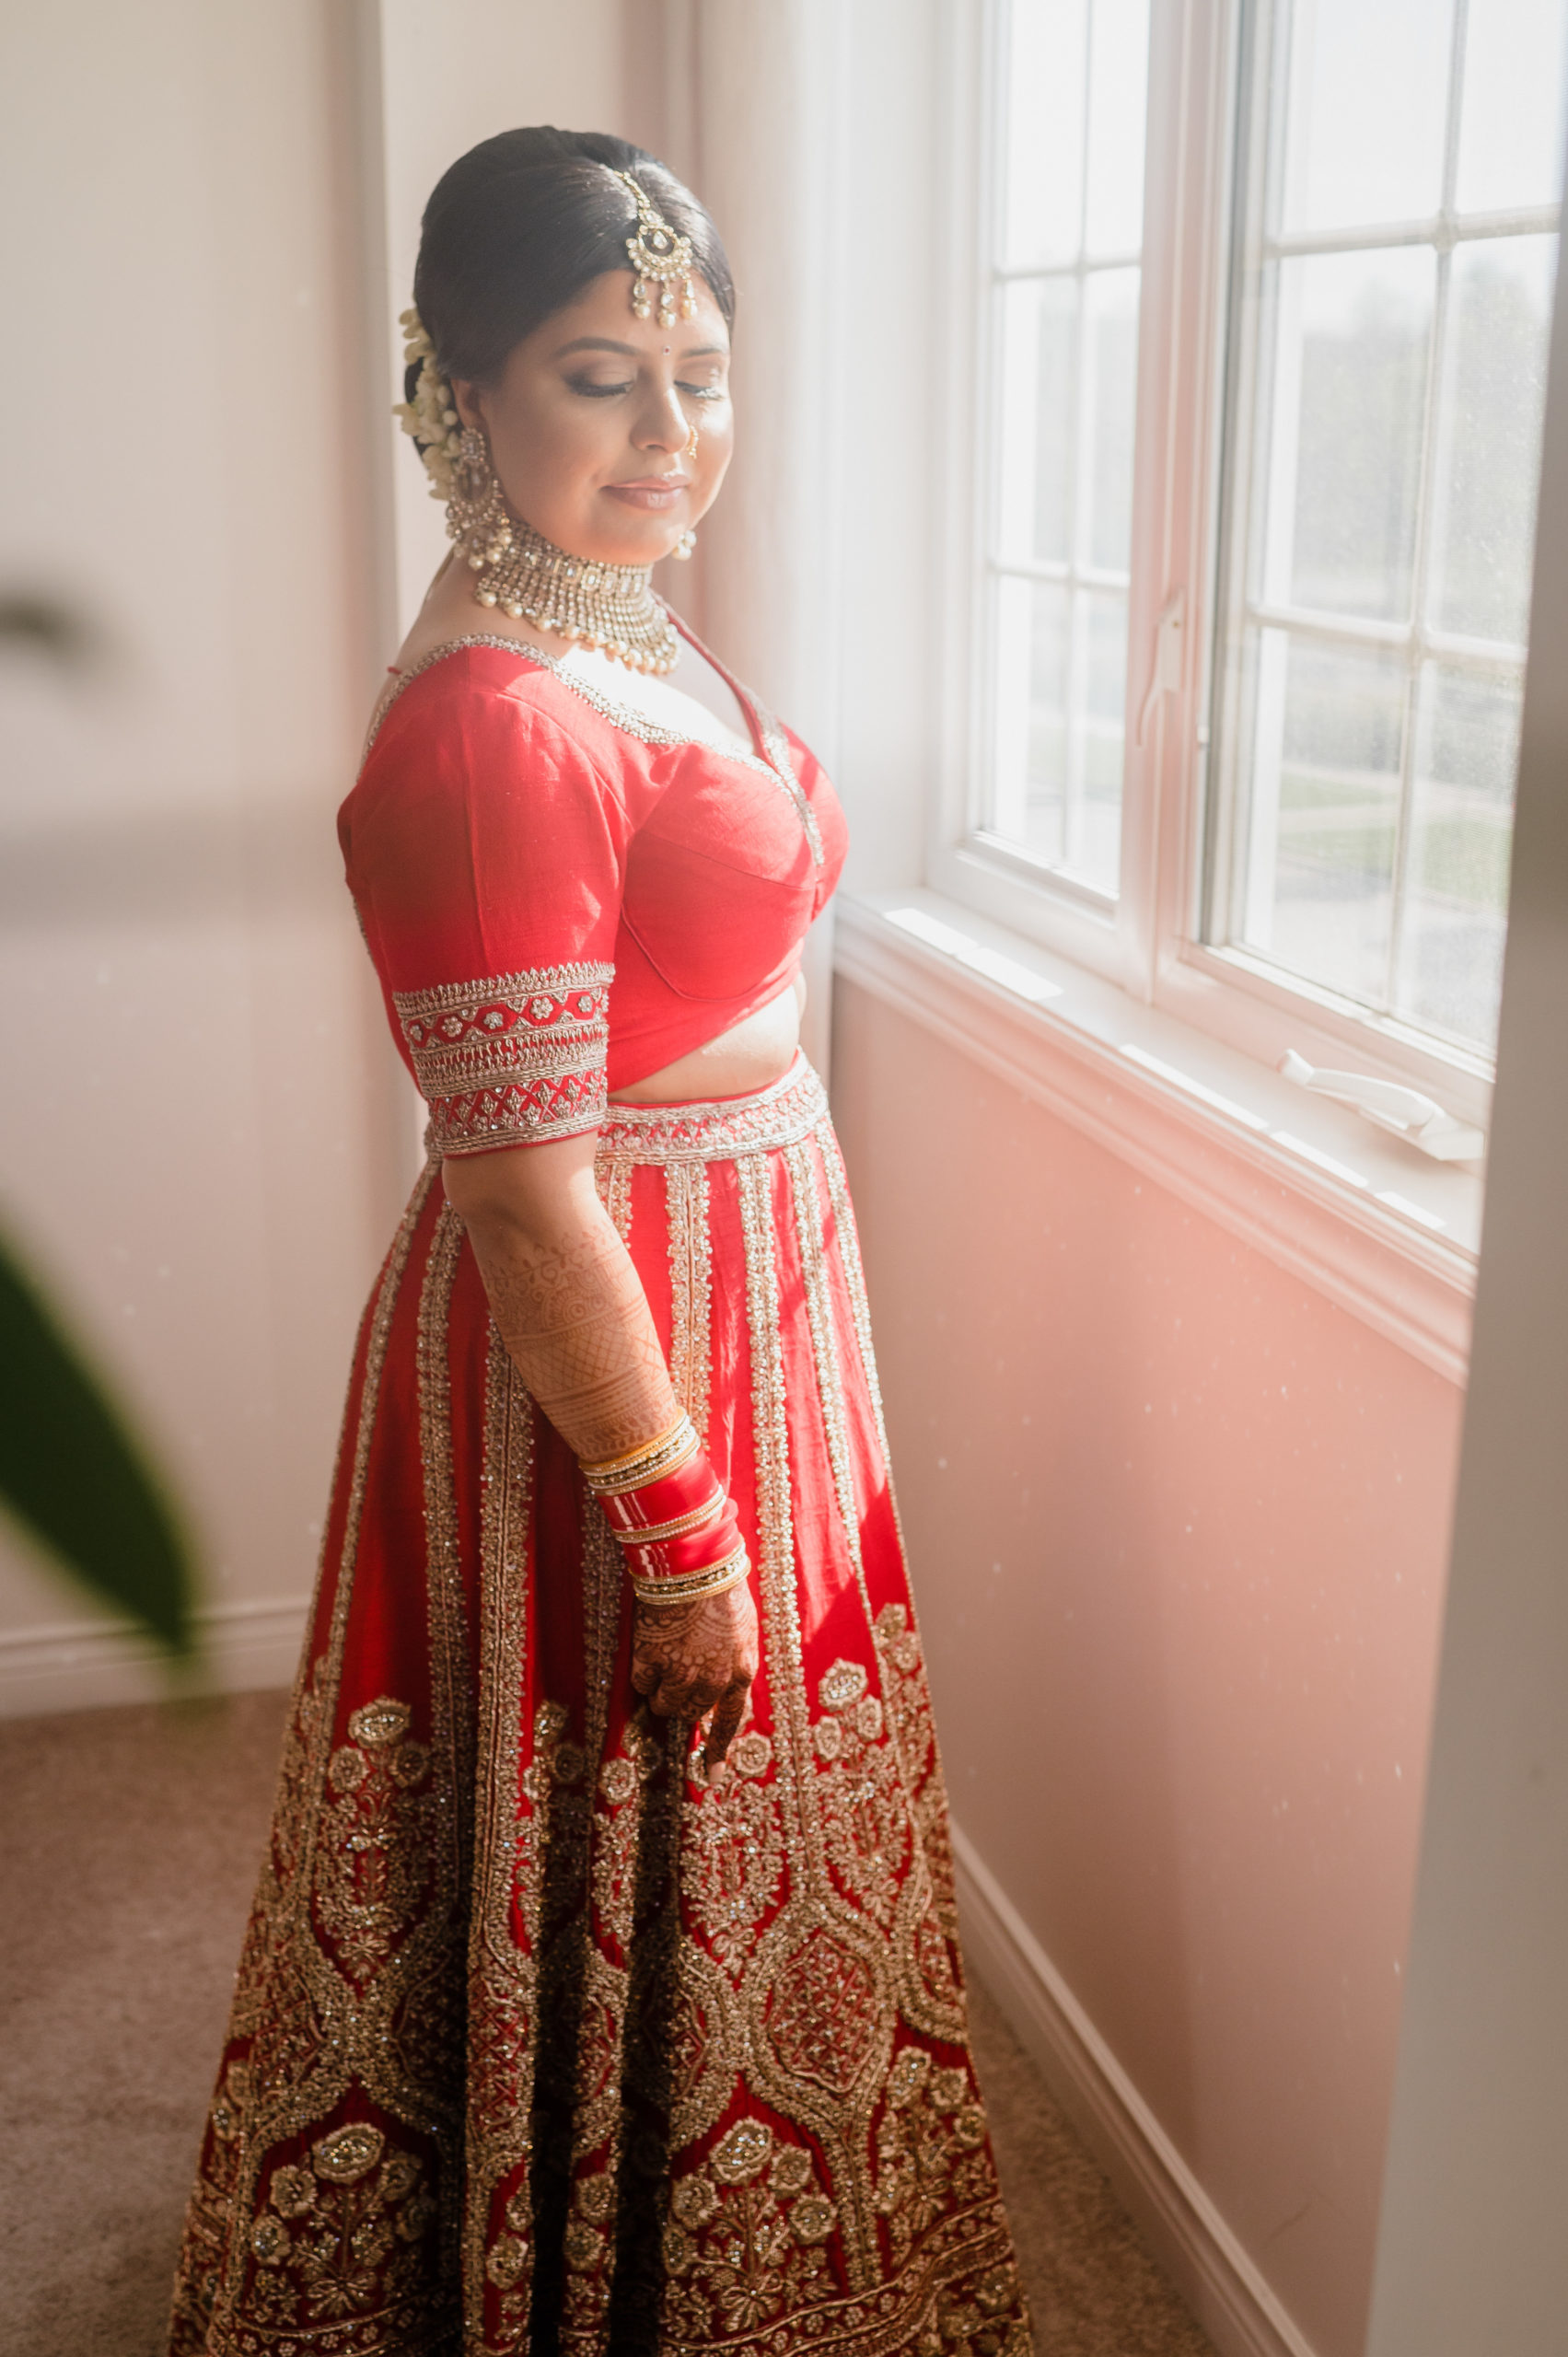 A South Asian person in a red lehenga stands by a window with their eyes closed, showing off their traditional gold adornments.